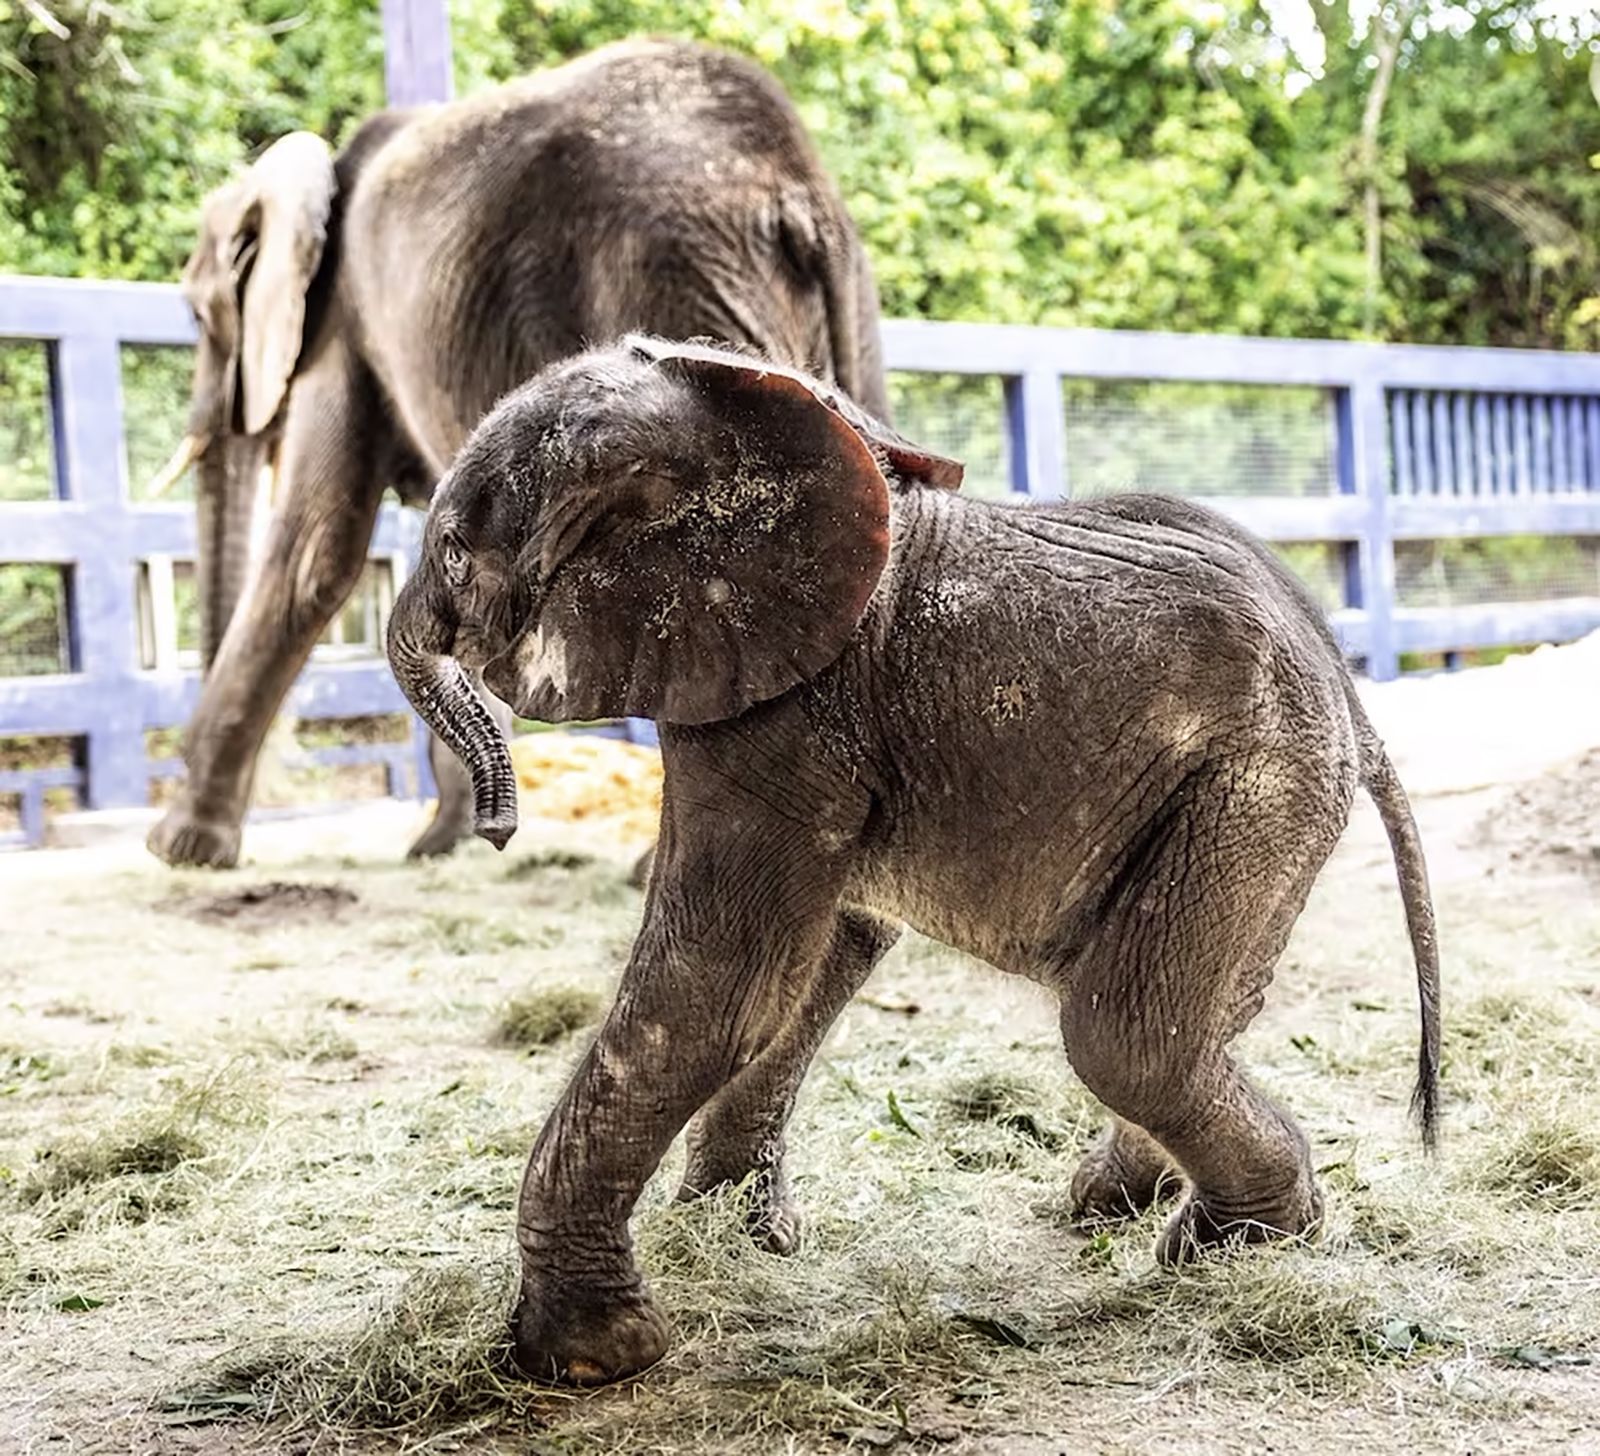 First baby African elephant born at Disney's Animal Kingdom in 7